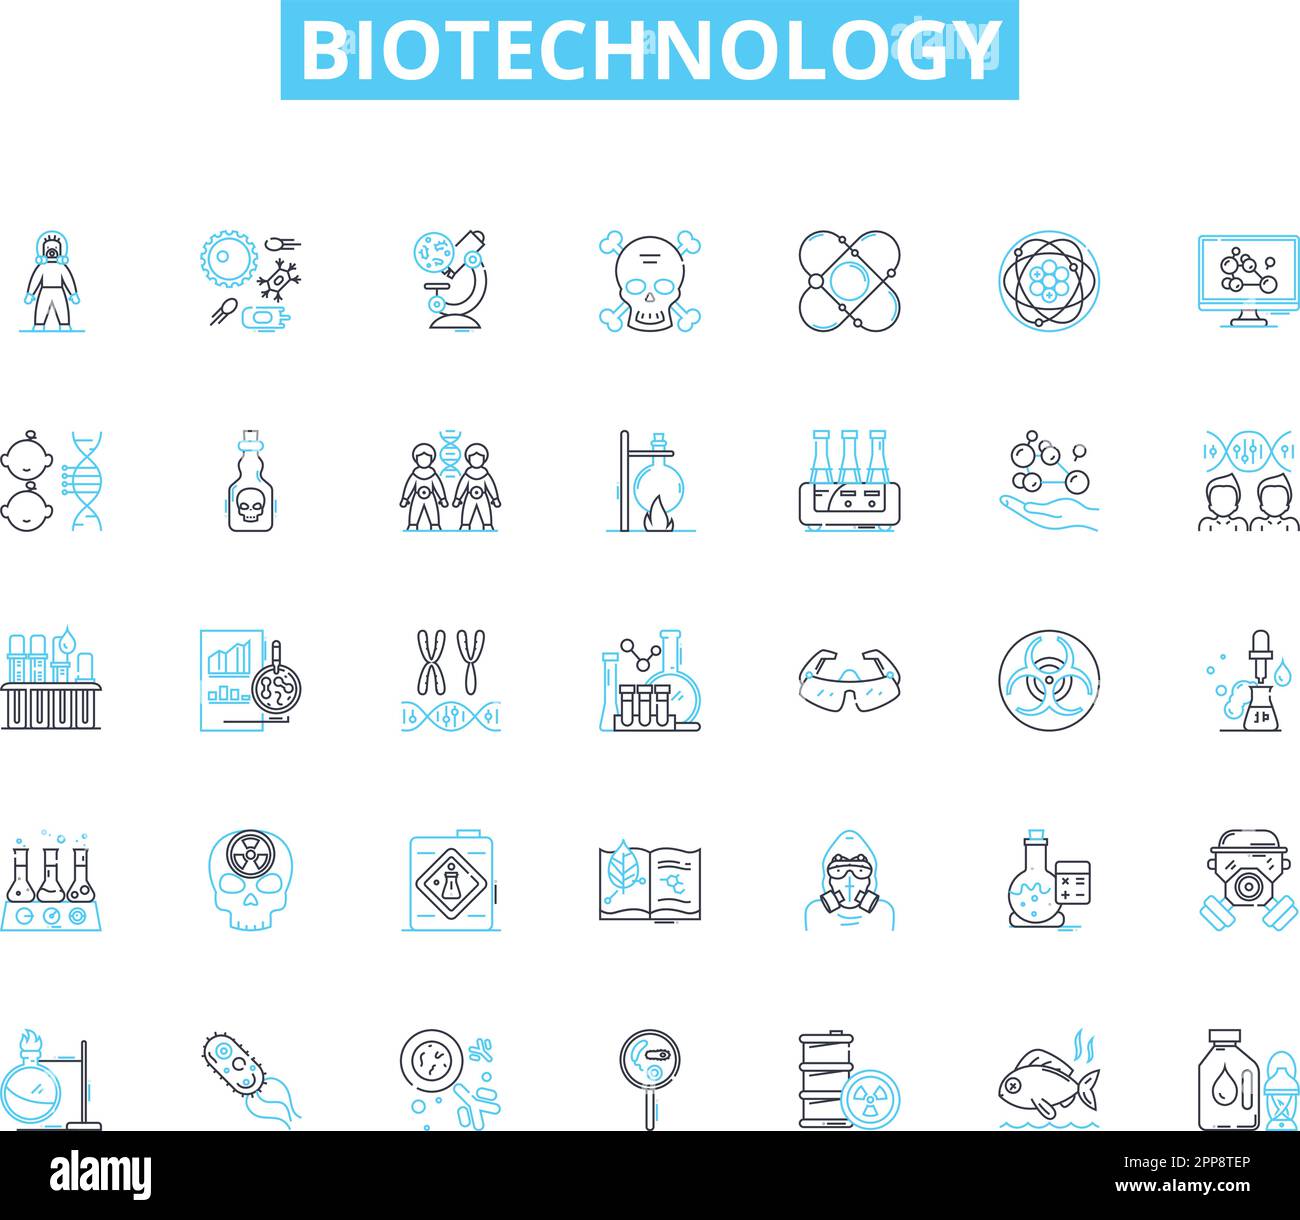 Biotechnology linear icons set. Genetic, Microorganisms, Cloning, Genome, Nanotechnology, Vaccines, Probiotics line vector and concept signs Stock Vector